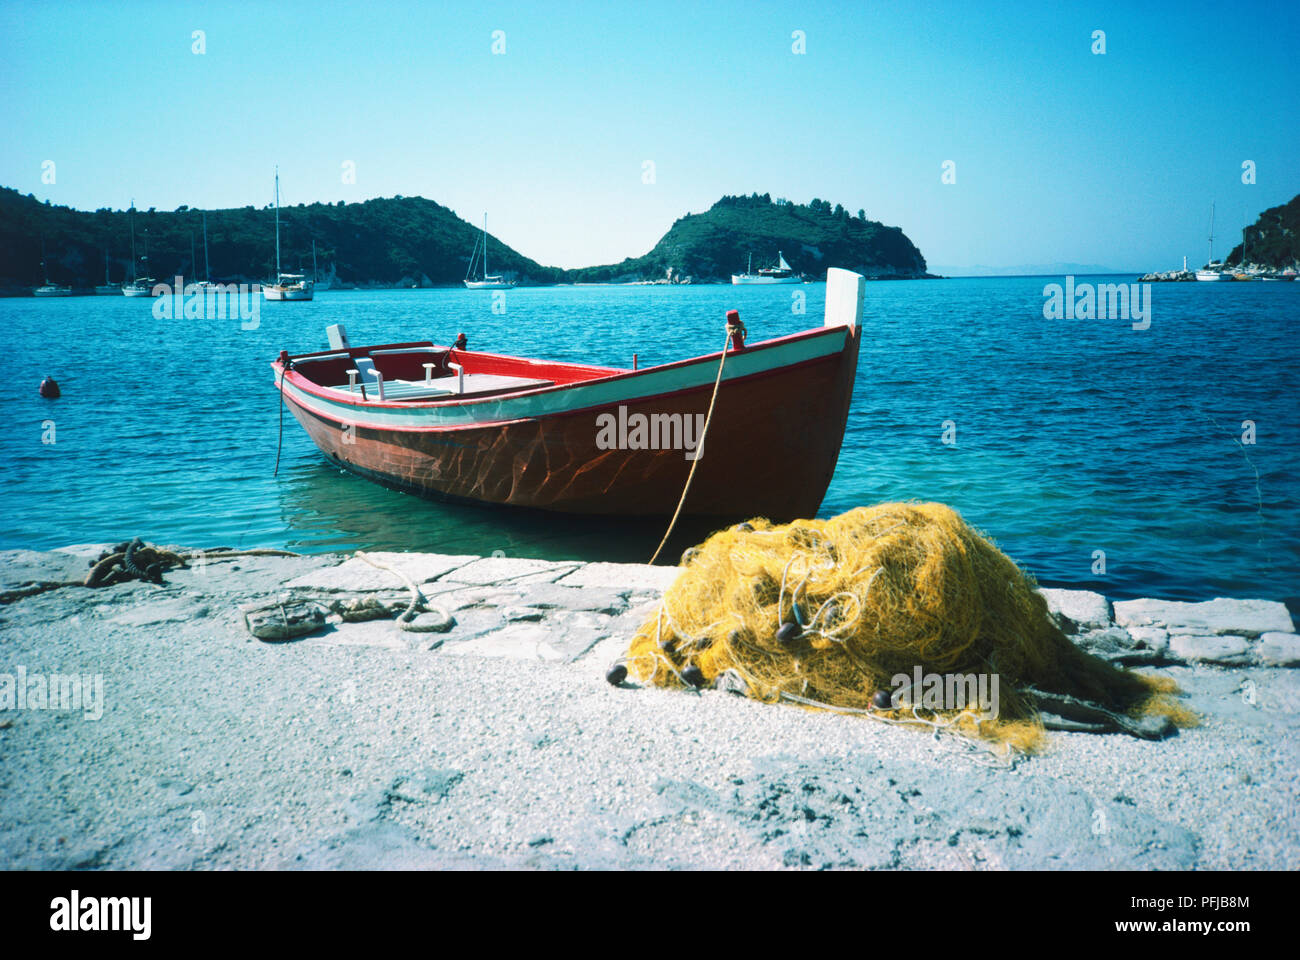 Greek fishing boat moored in a bay, fishing nets on shore Stock Photo